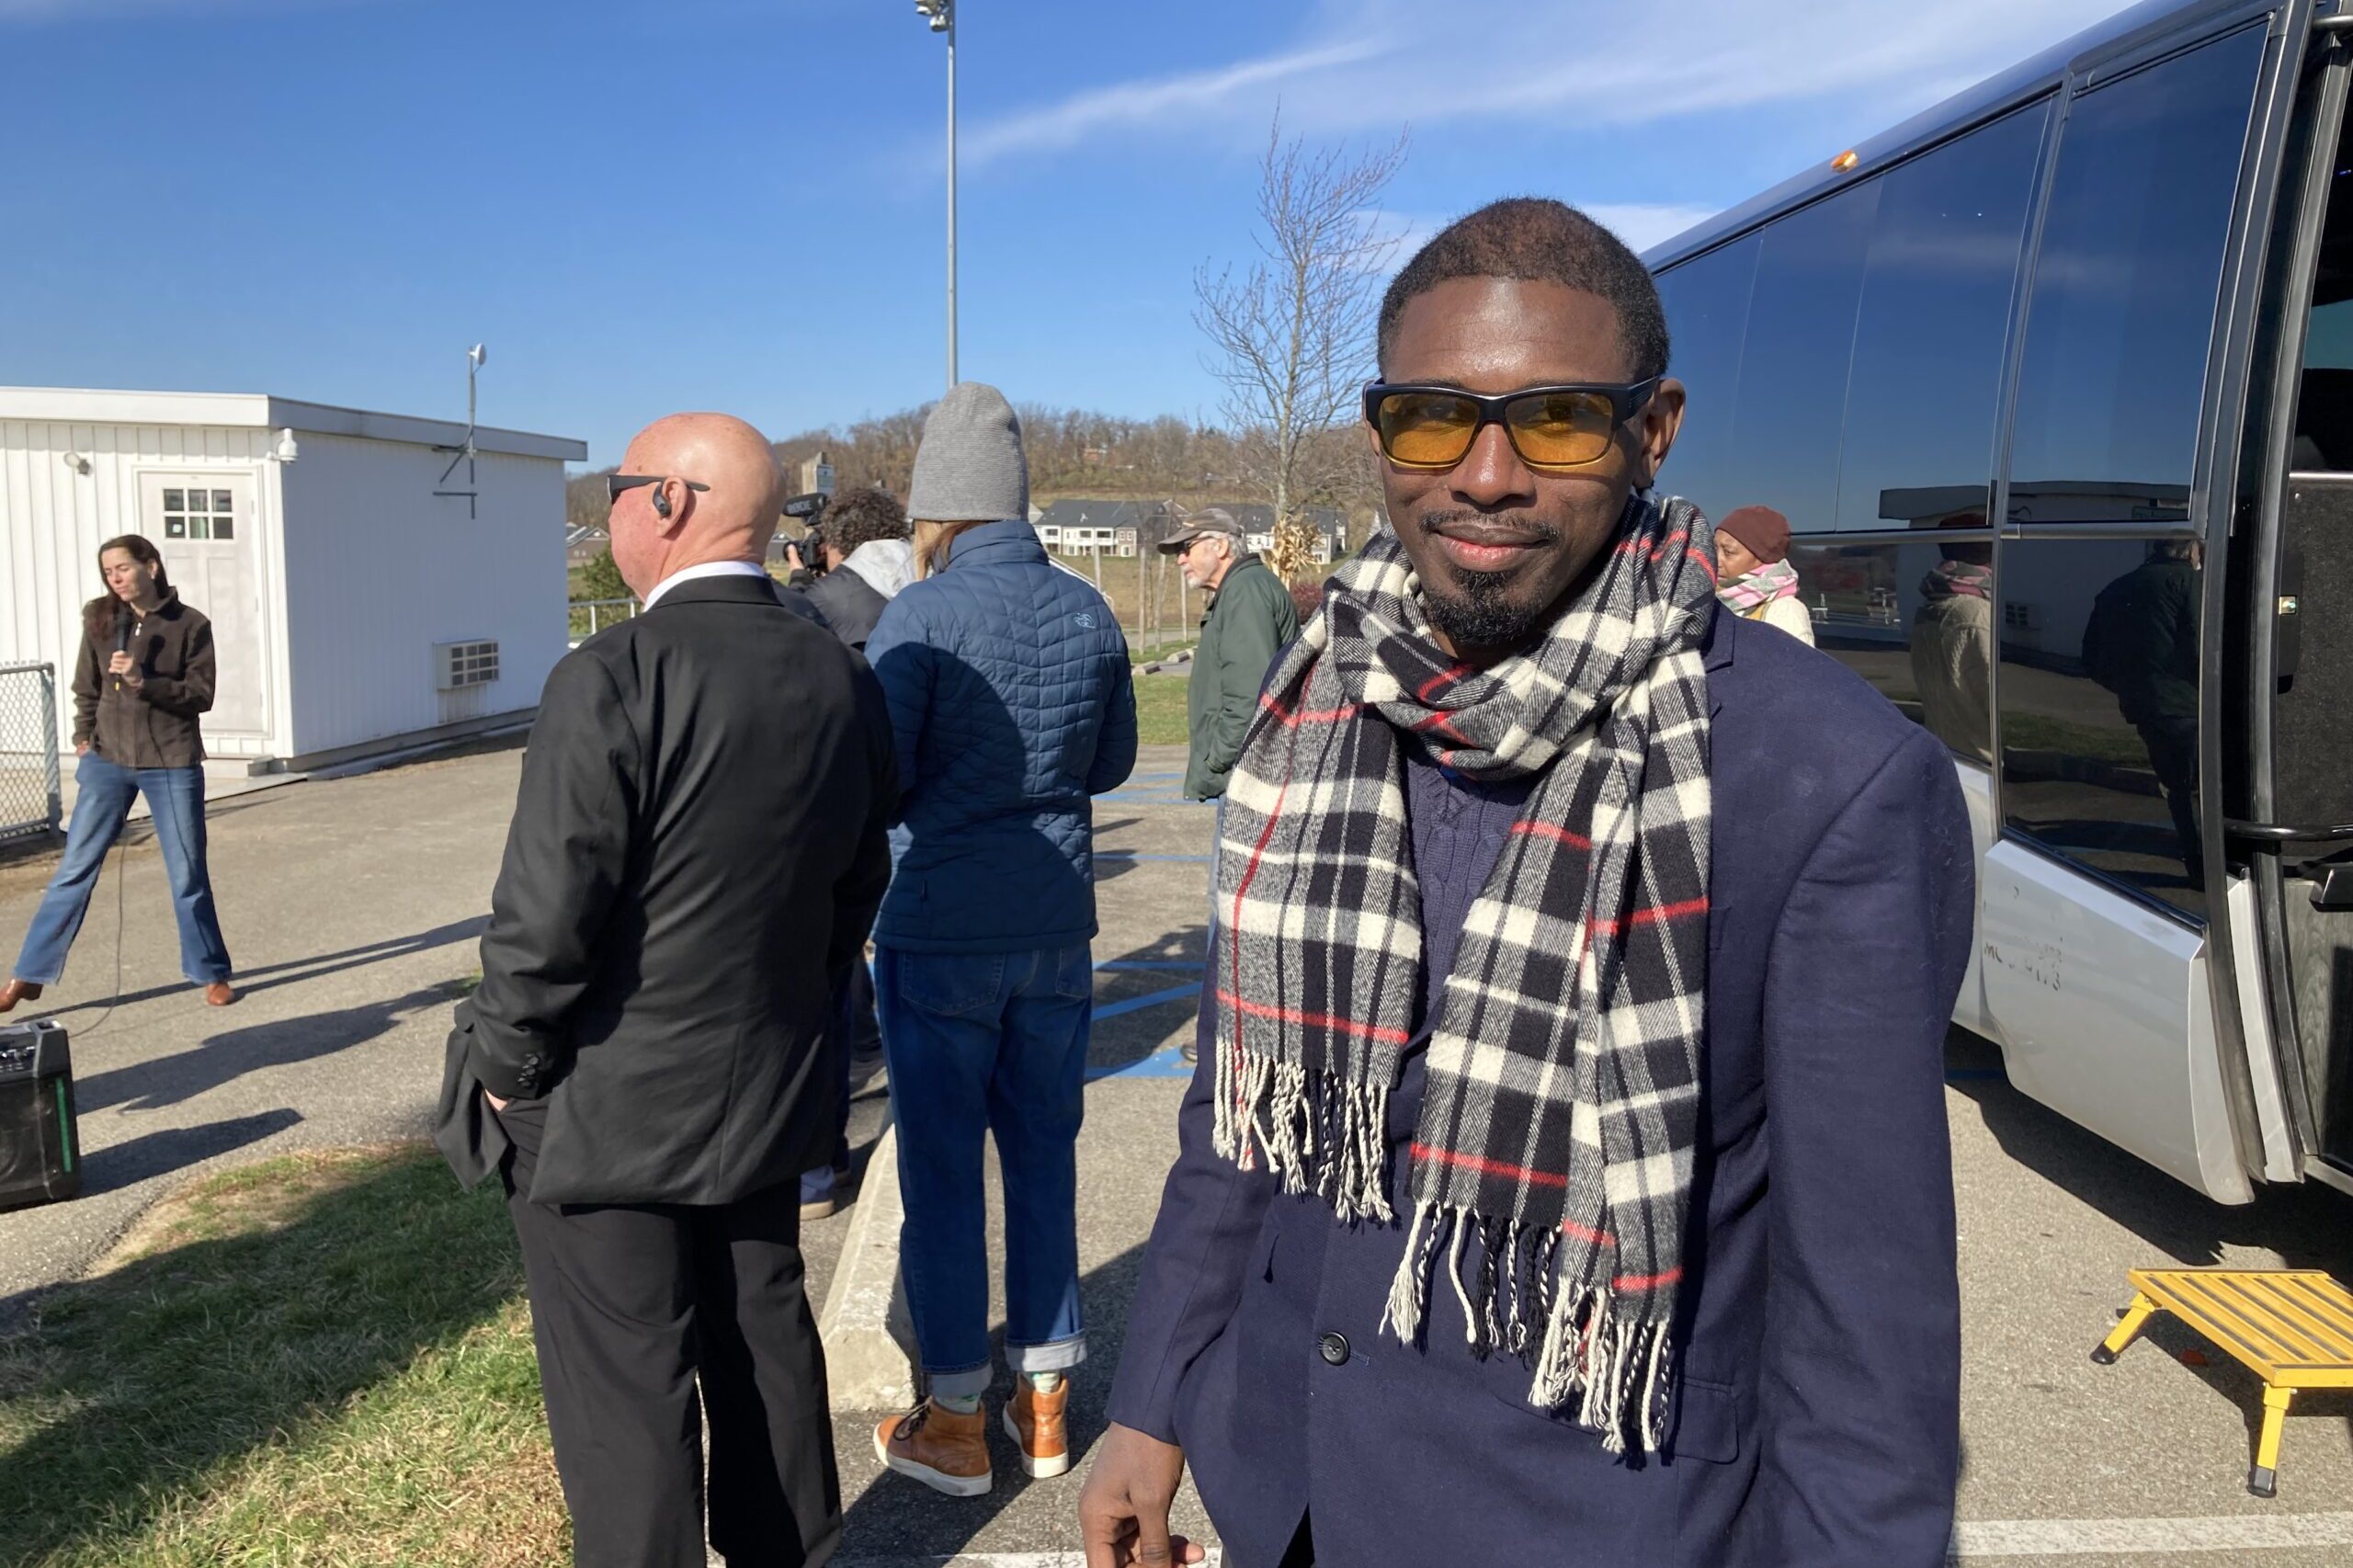 A Black man with a plaid scarf, sunglasses and blue coat looks at the camera as a group of people are listening to a speaker behind him, with a tour bus on the right